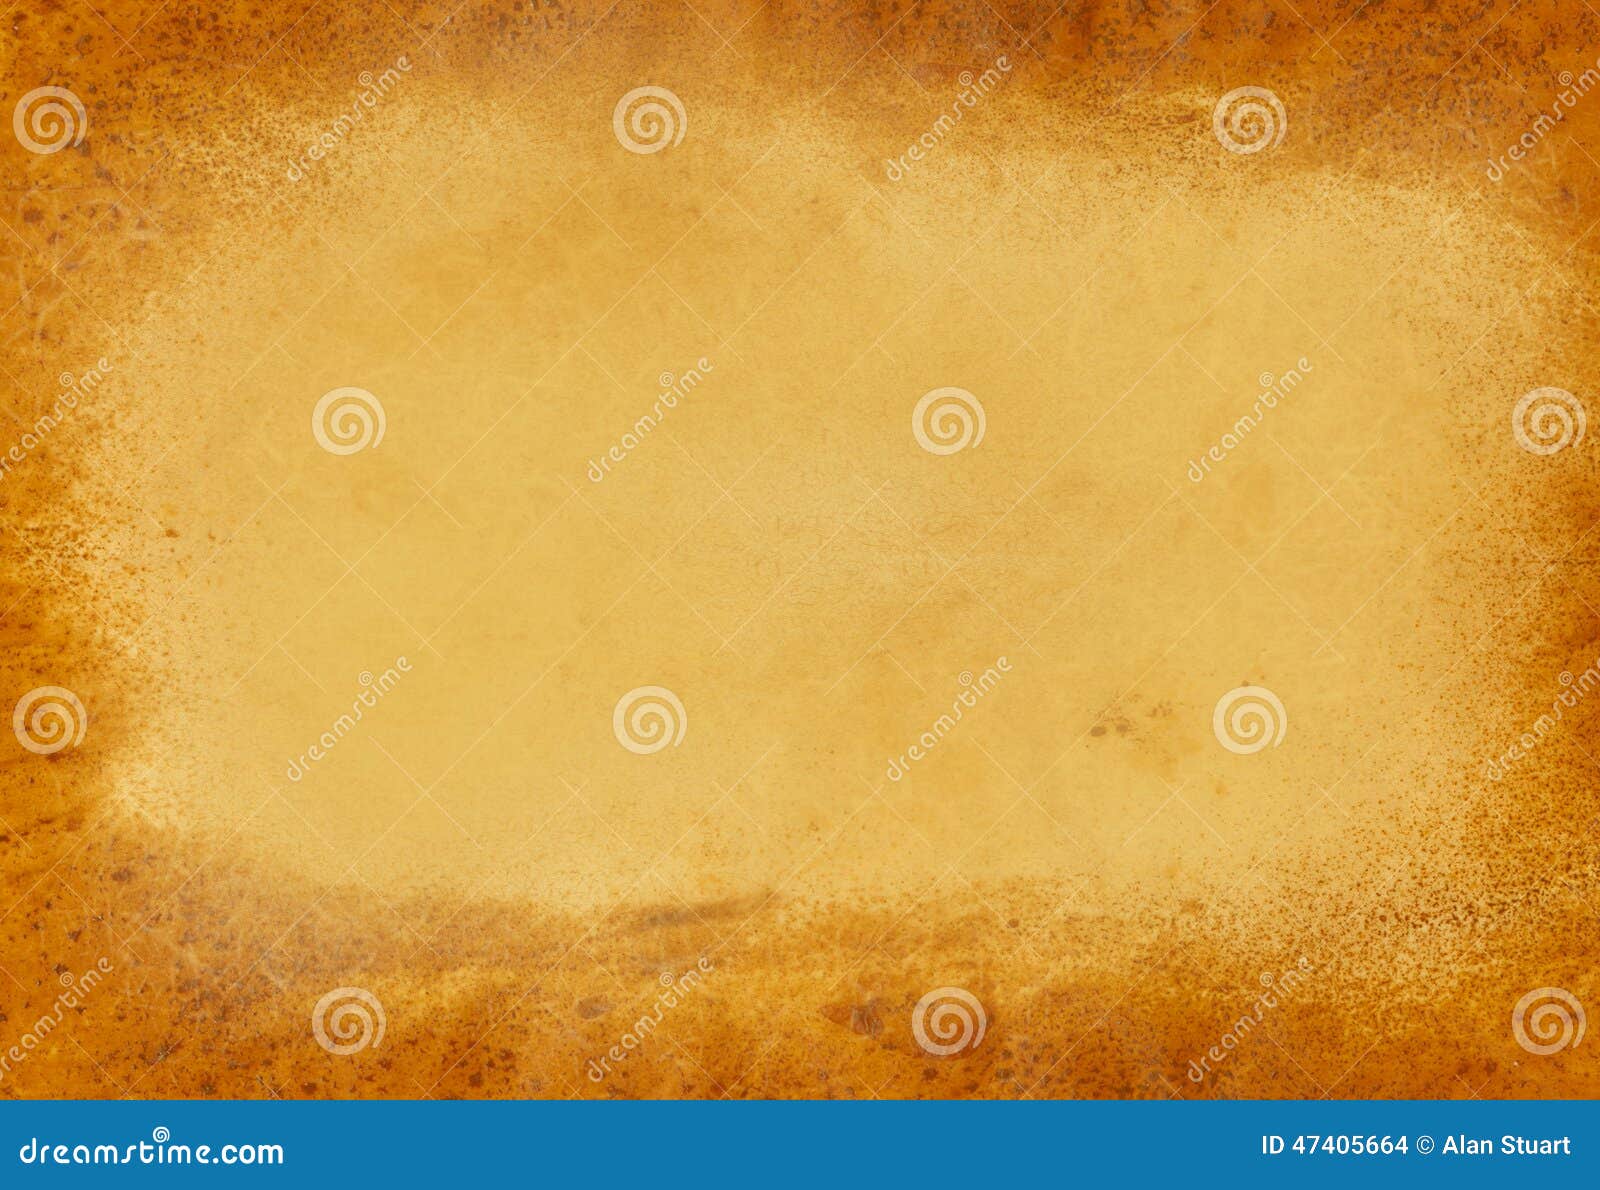 Brown blank background stock photo. Image of winter, scroll - 47405664